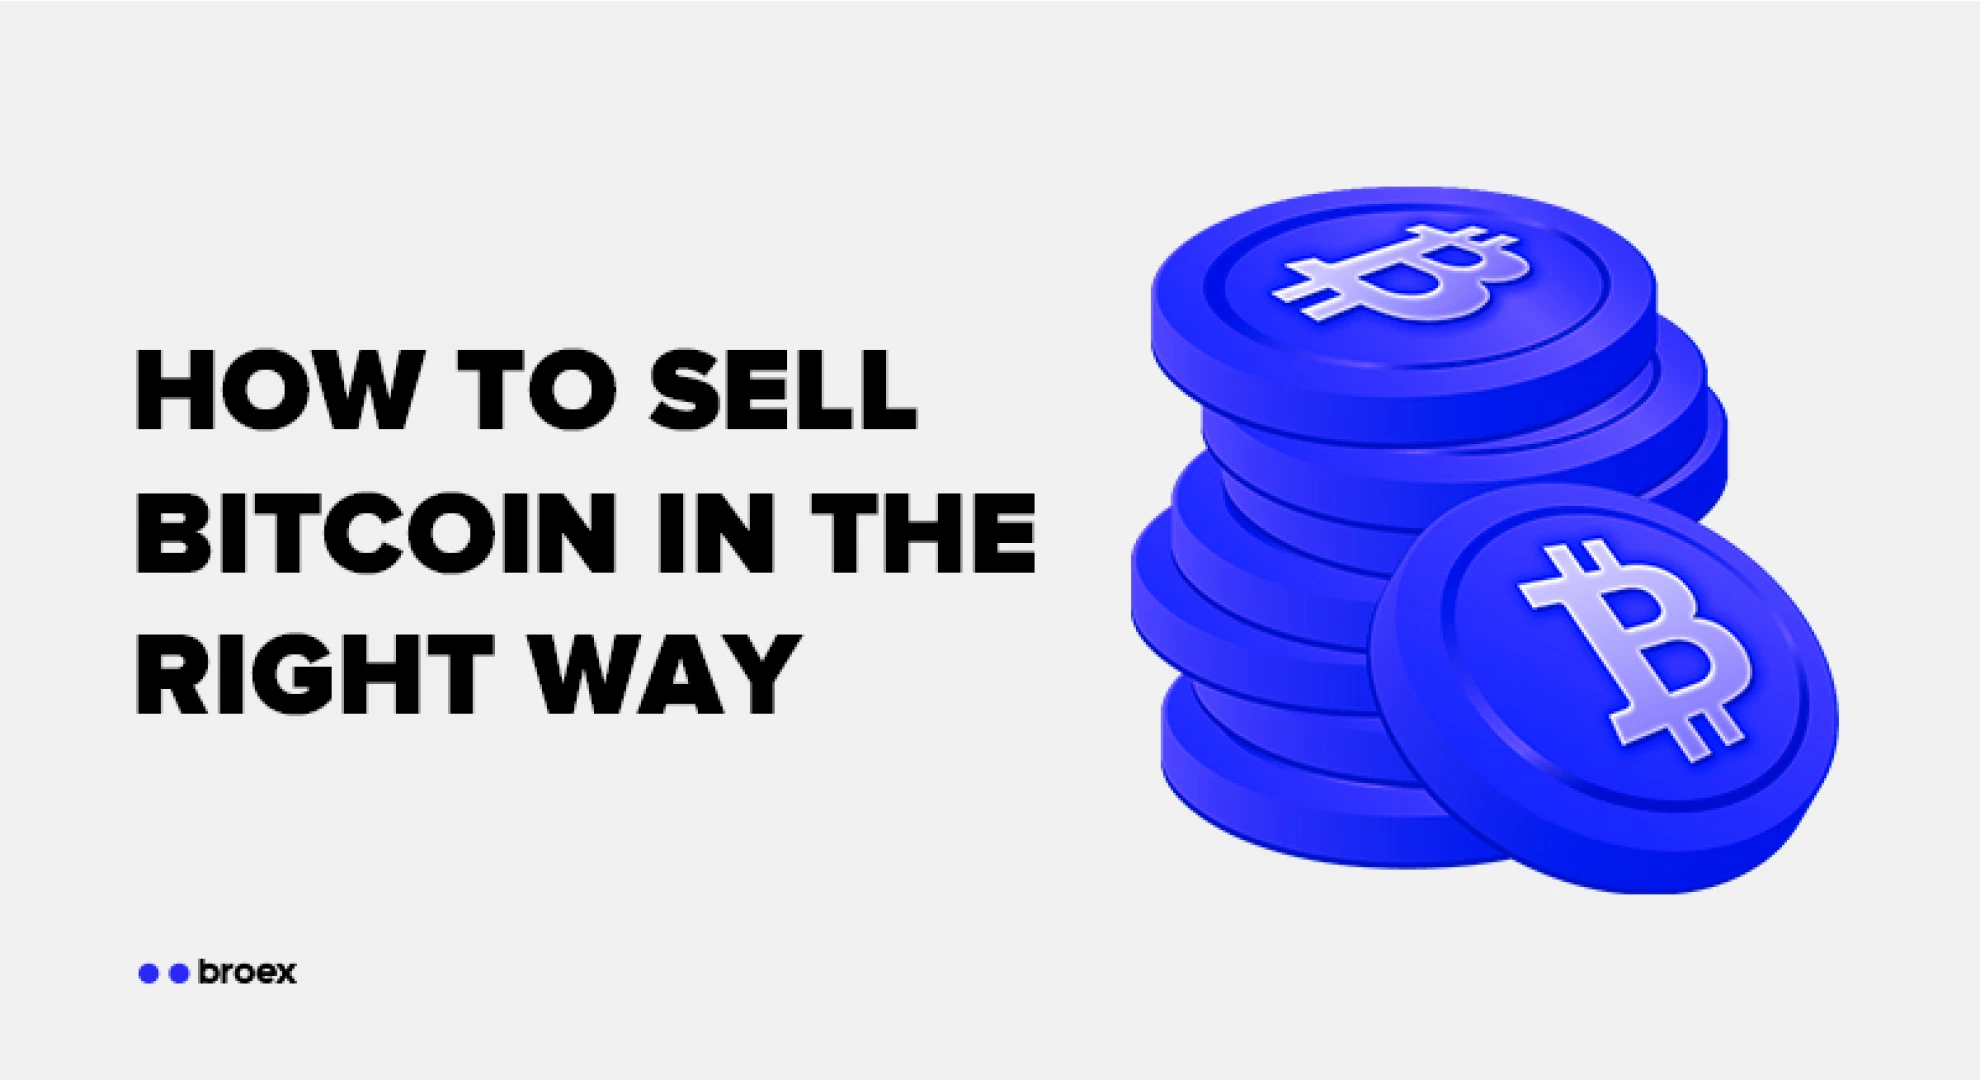 How to sell Bitcoin in the right way